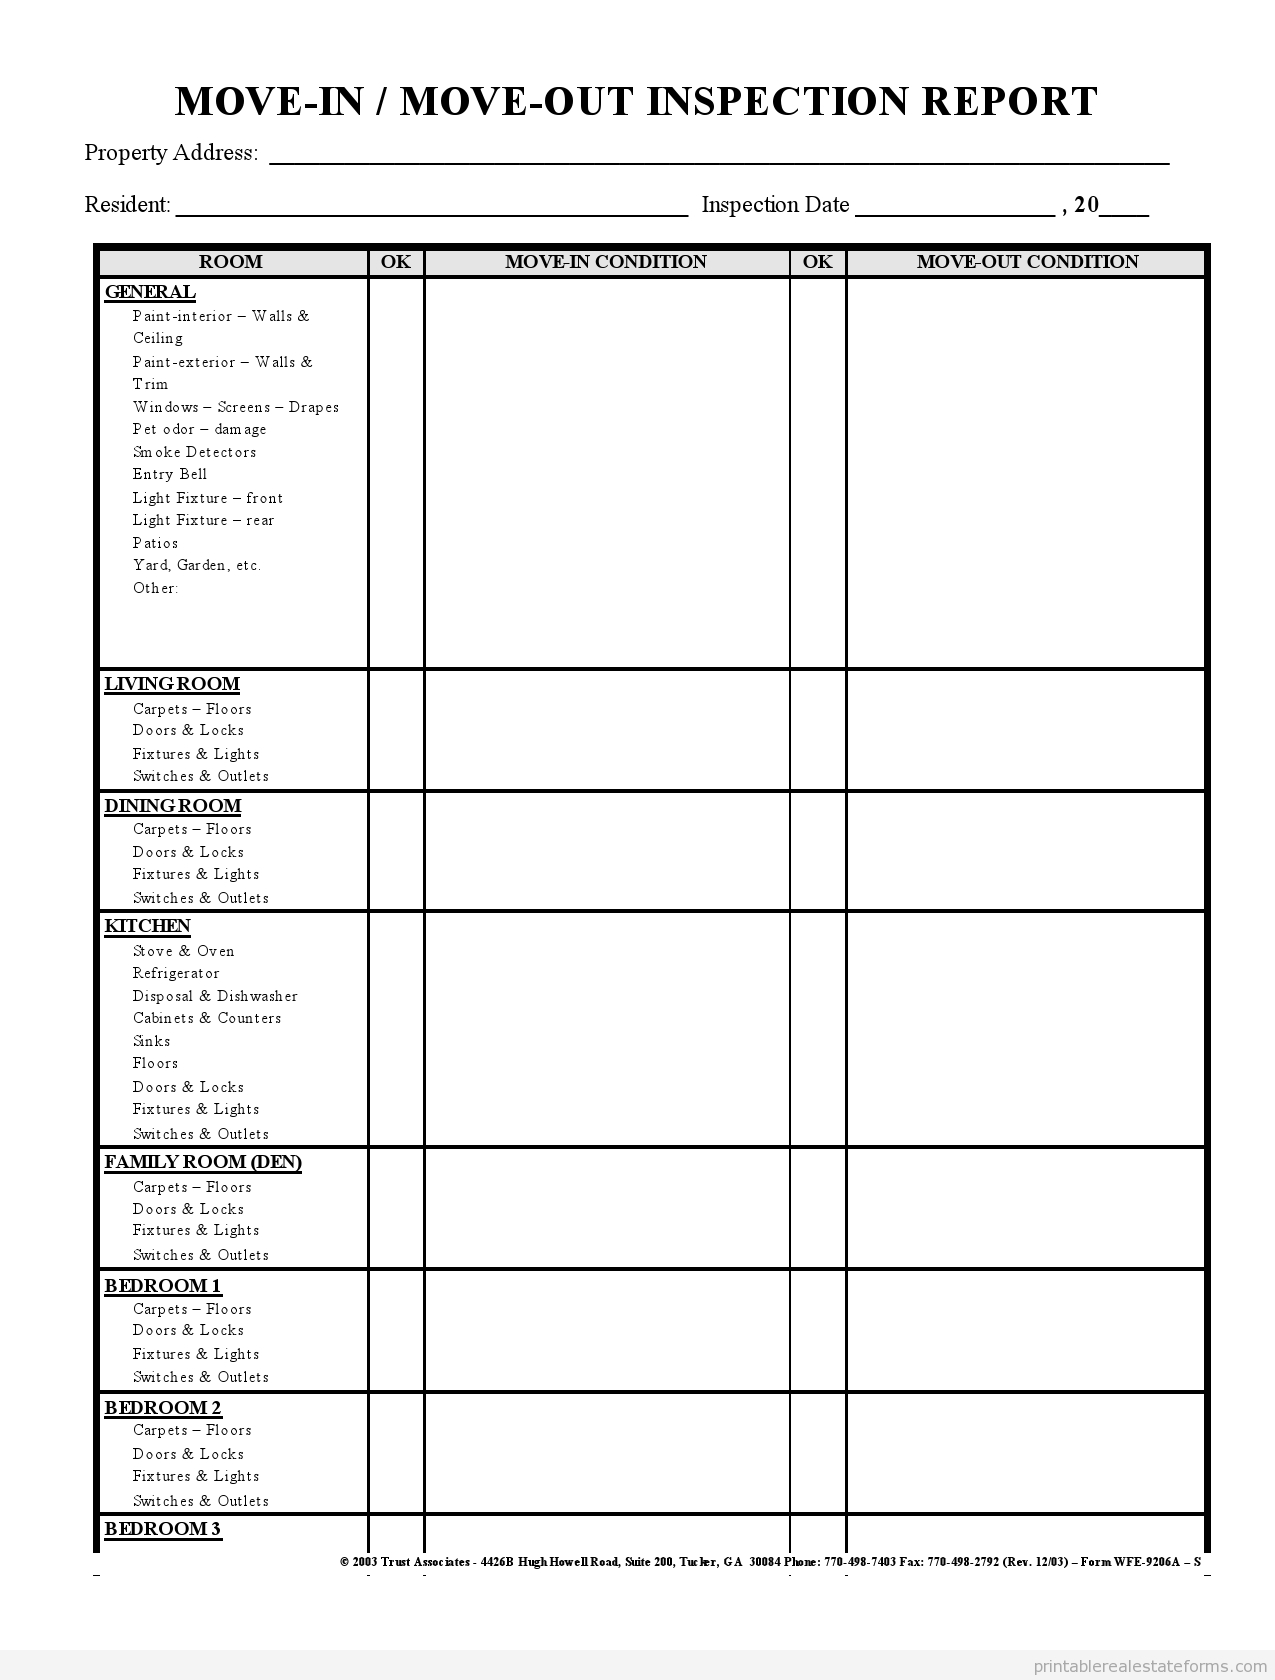 Sample Printable Move In Move Out Inspection Report Form Intended For Property Management Inspection Report Template